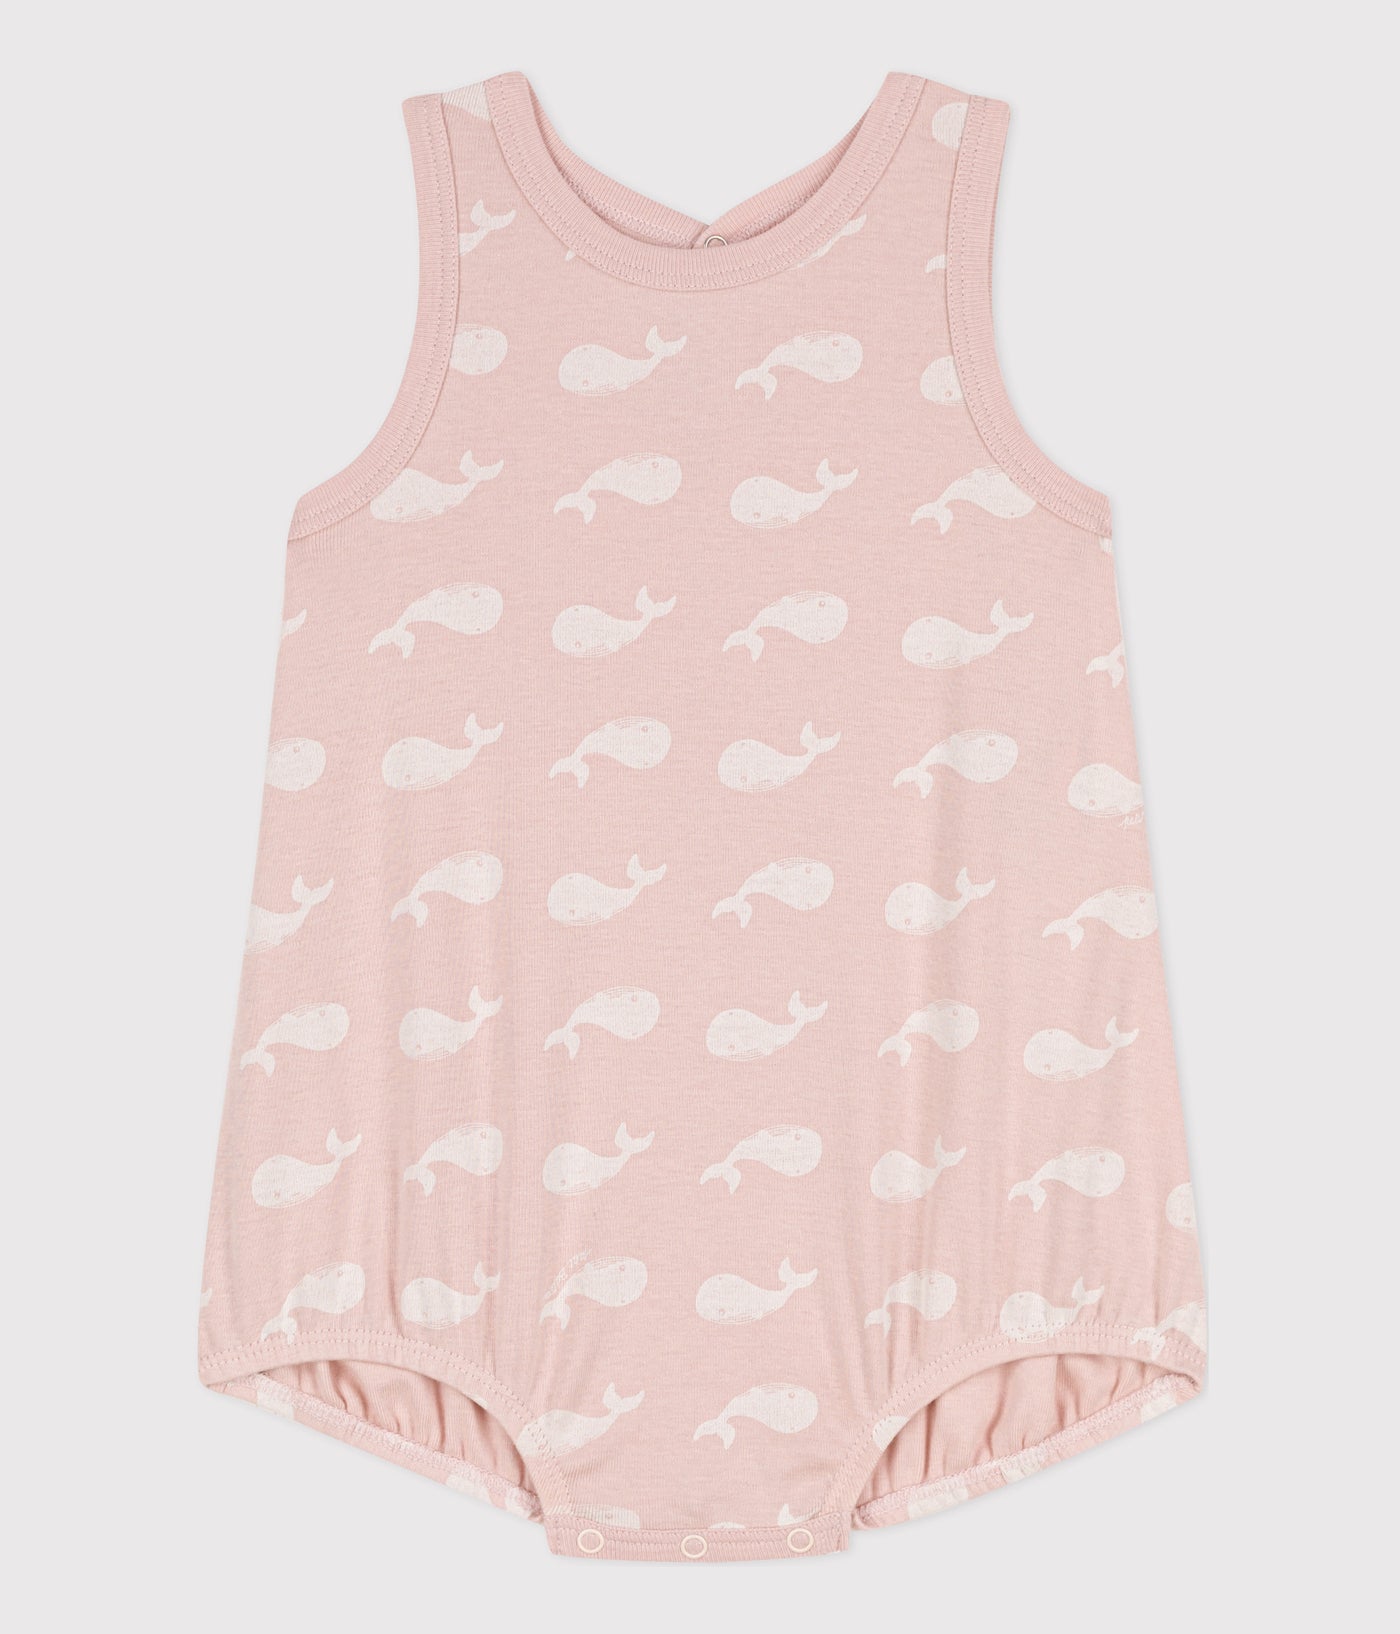 BABIES' COTTON PINK WHALE PLAYSUIT